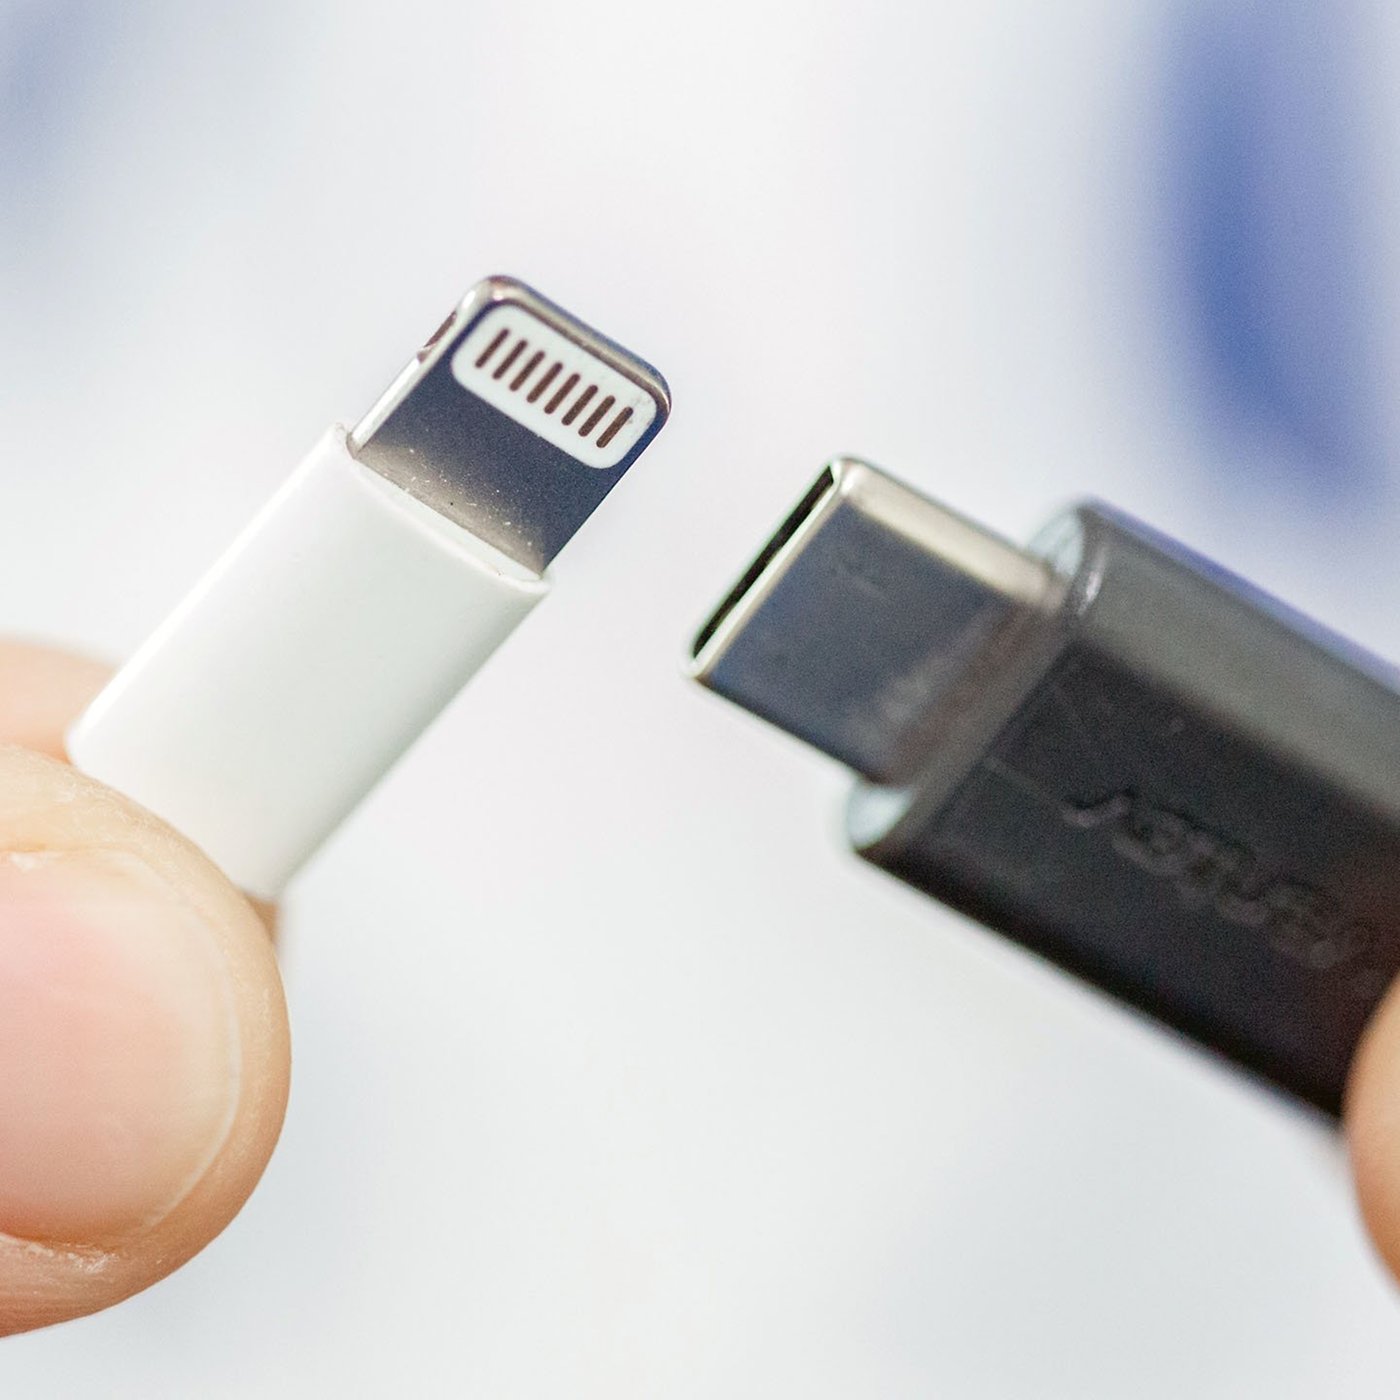 What's the Difference Between USB-C and Lightning?